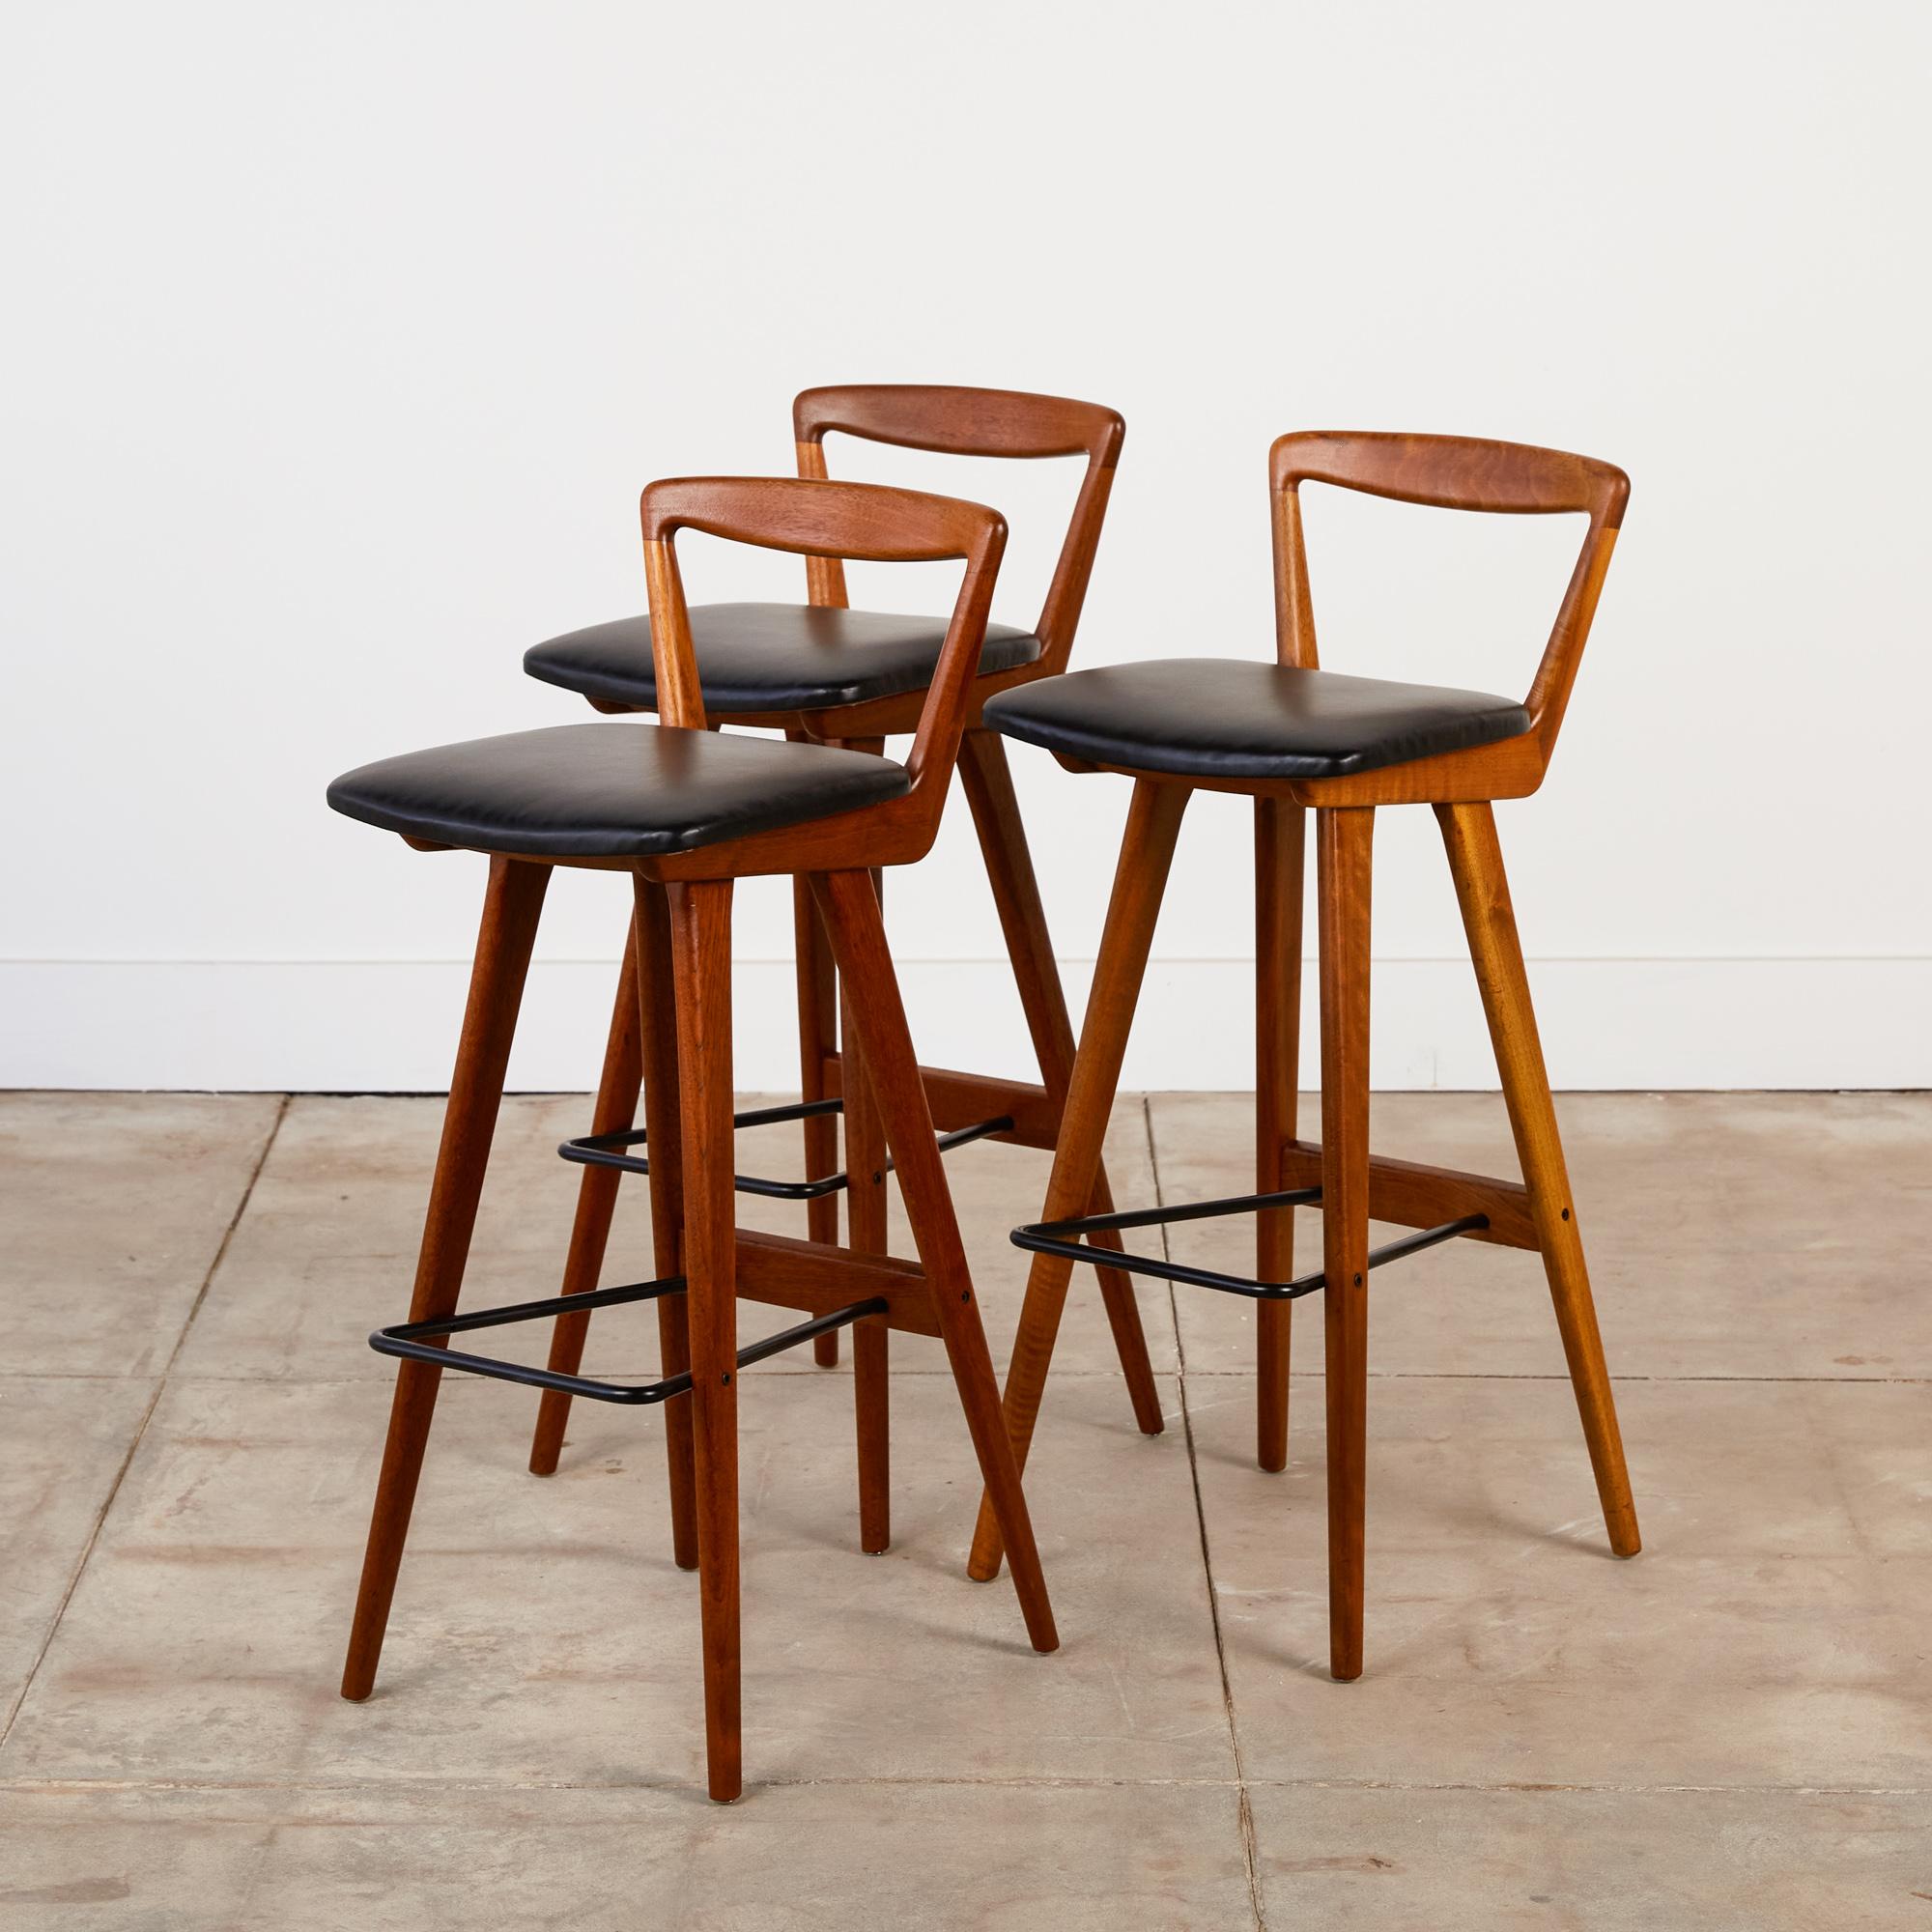 A set of three 1960s bar stools by Henry Rosengren Hansen for Brande Møbelindustri. The stools have new black leather upholstered seats and sit on frames of solid teak. Each stool has flat, tapered legs and an open backrest. The horizontal